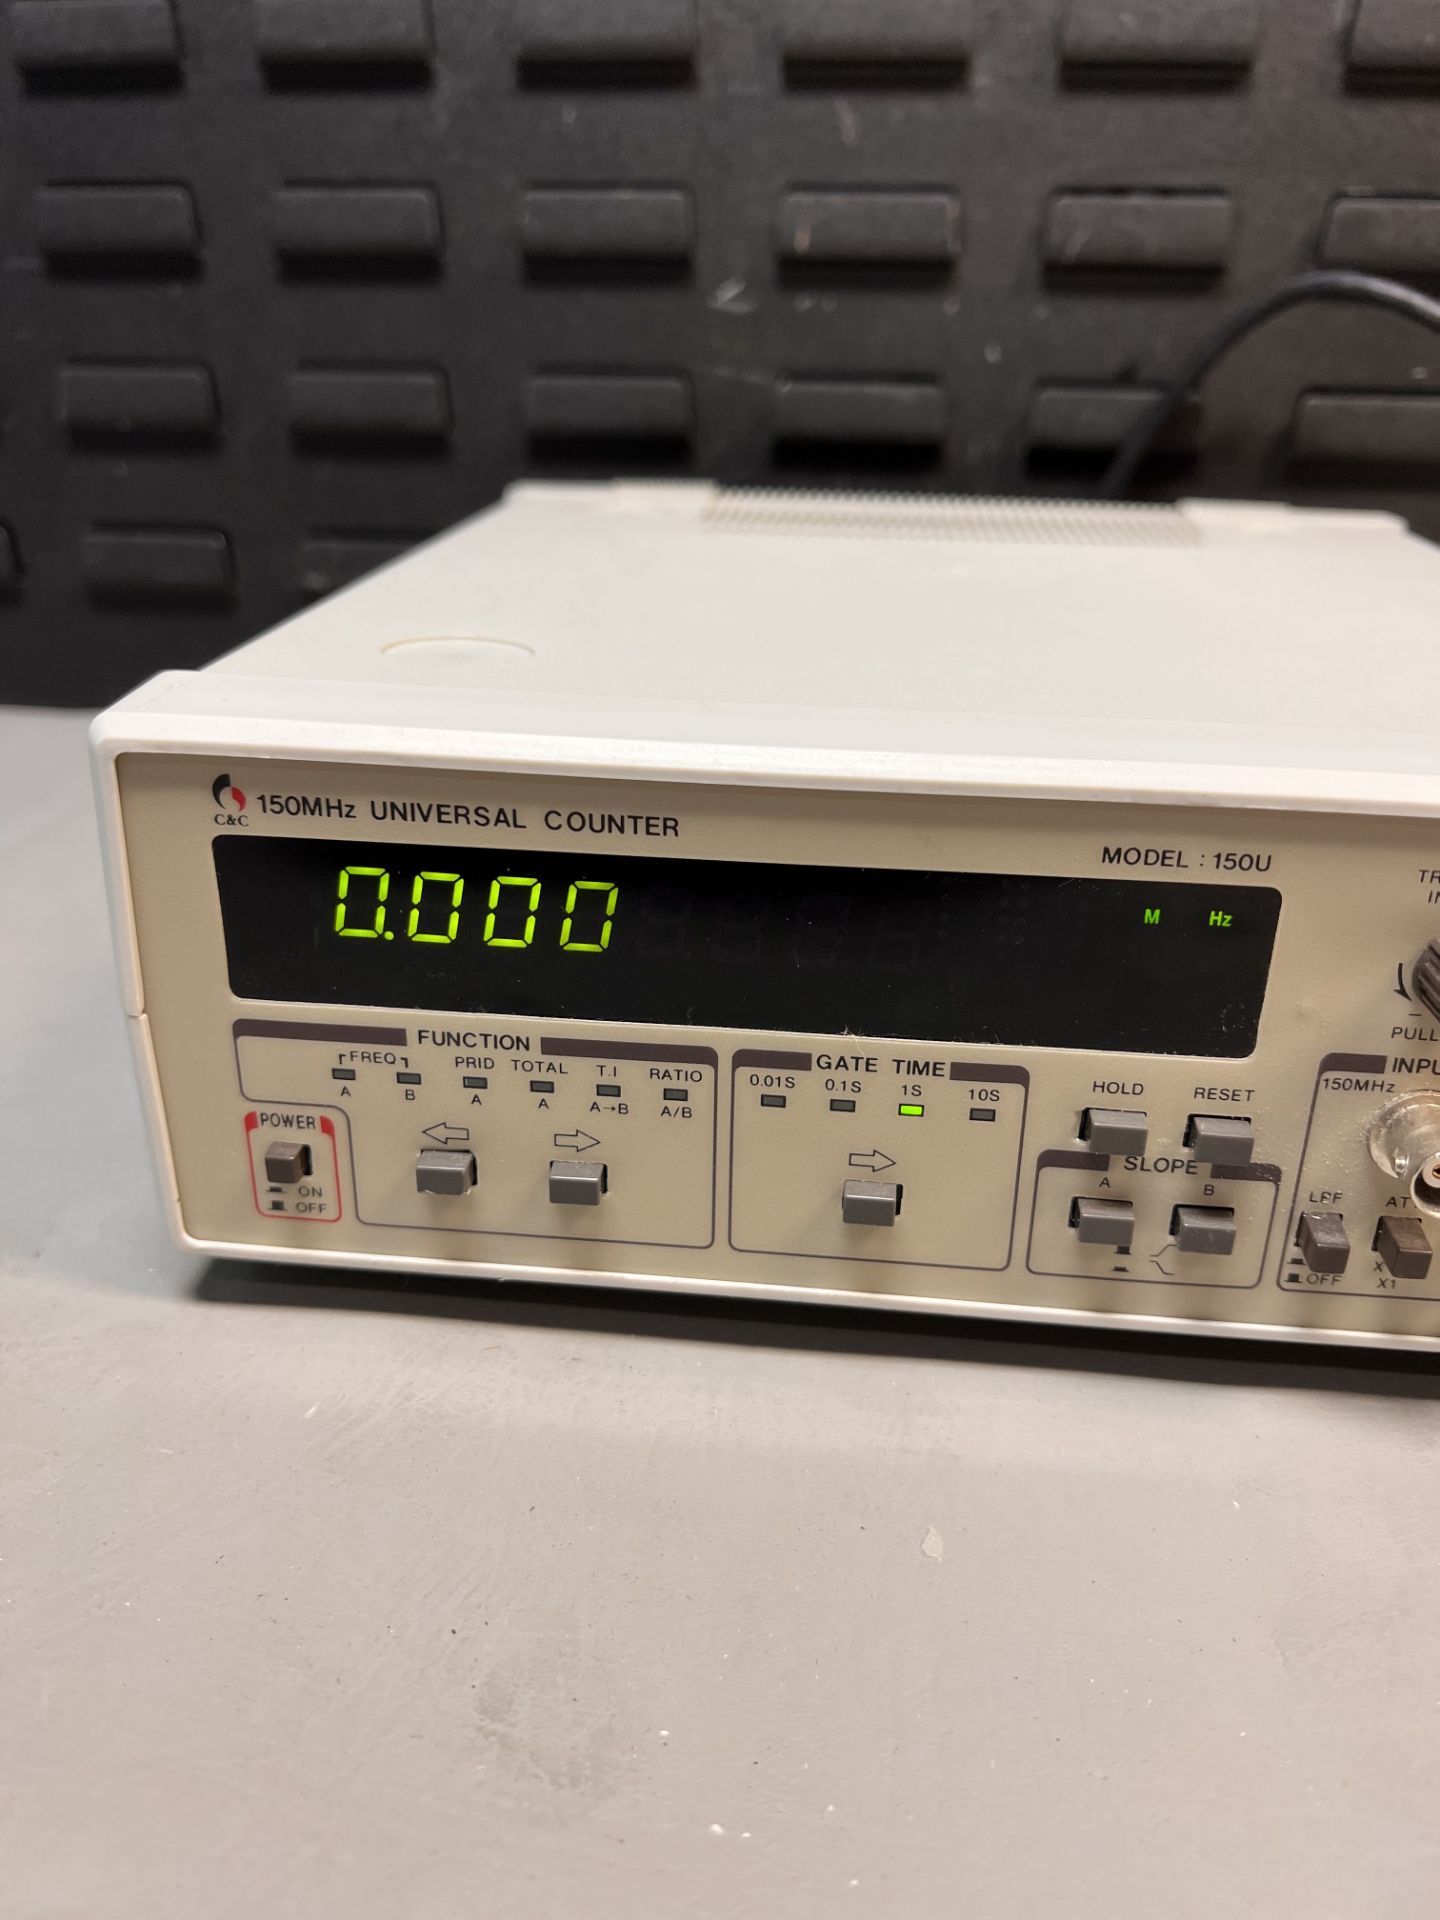 C&C 150MHz UNIVERSAL COUNTER - Image 4 of 4